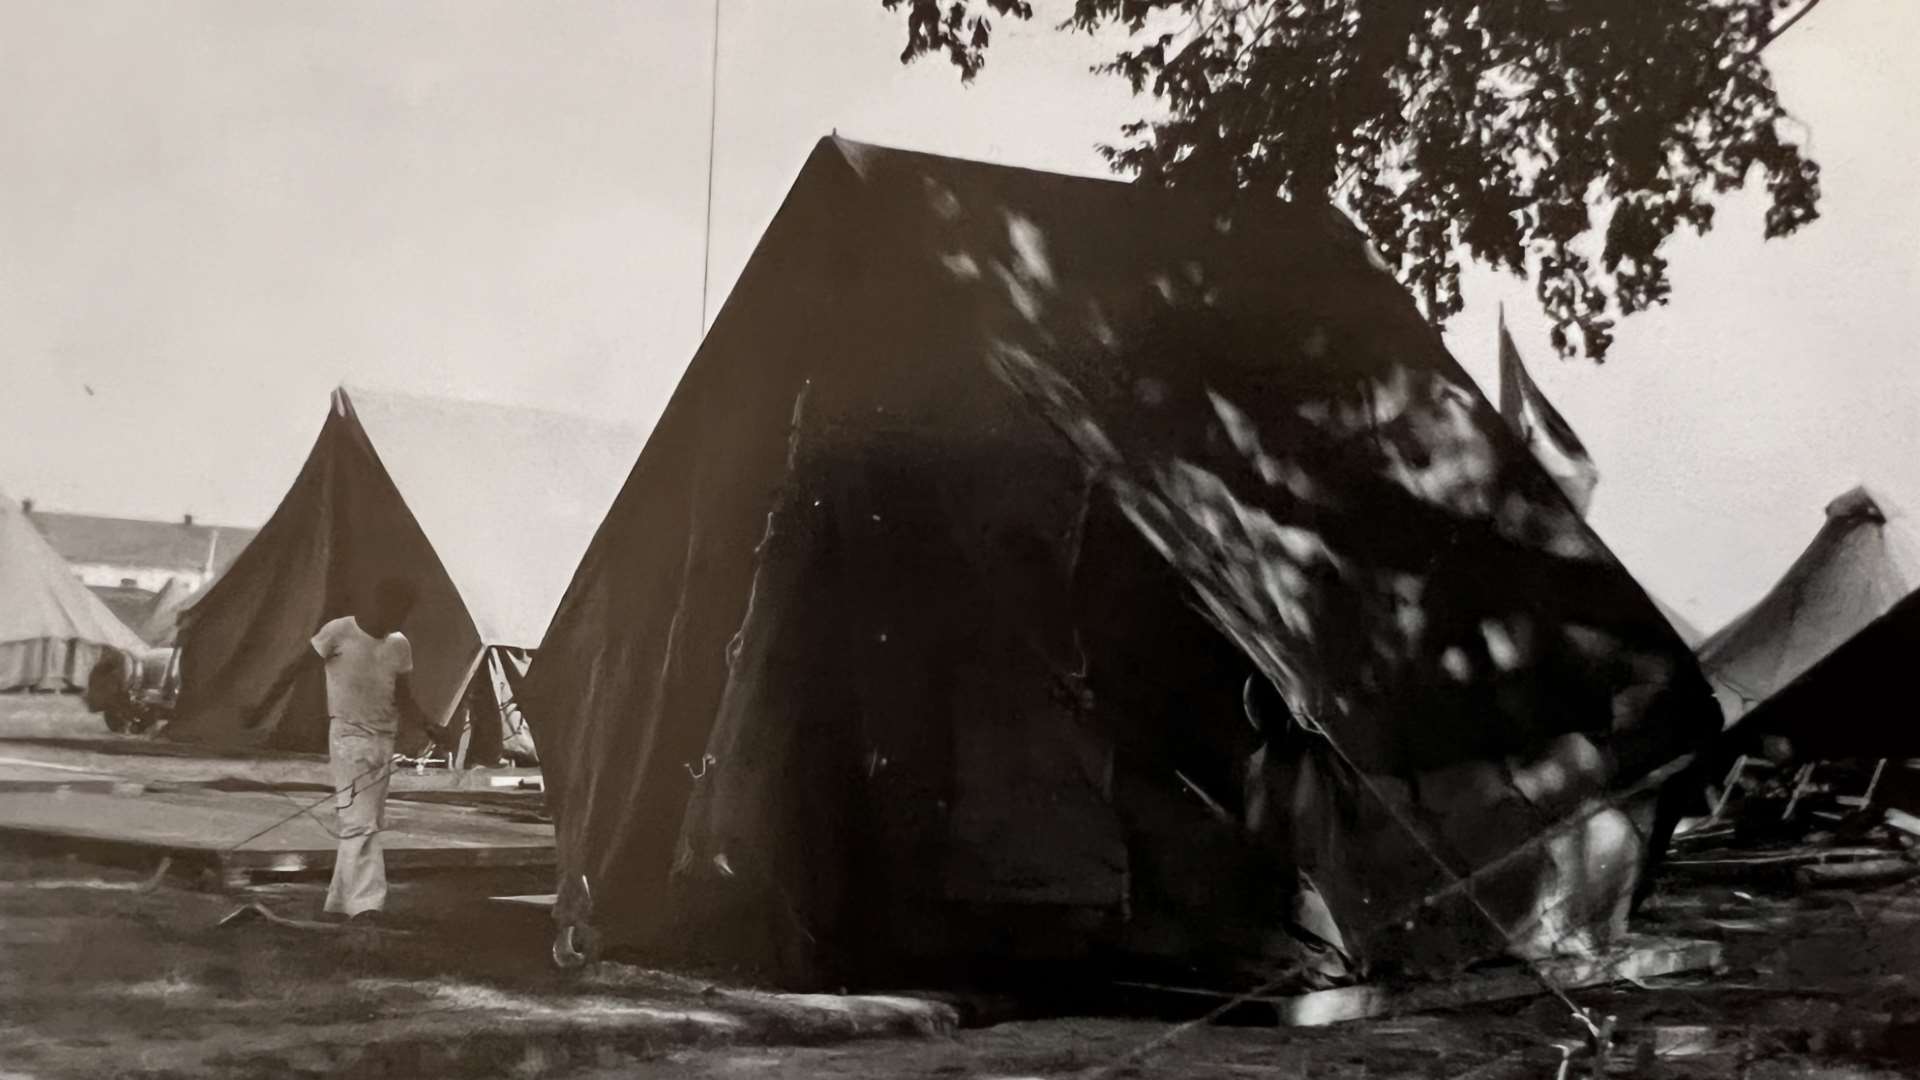 Camp Perry tents